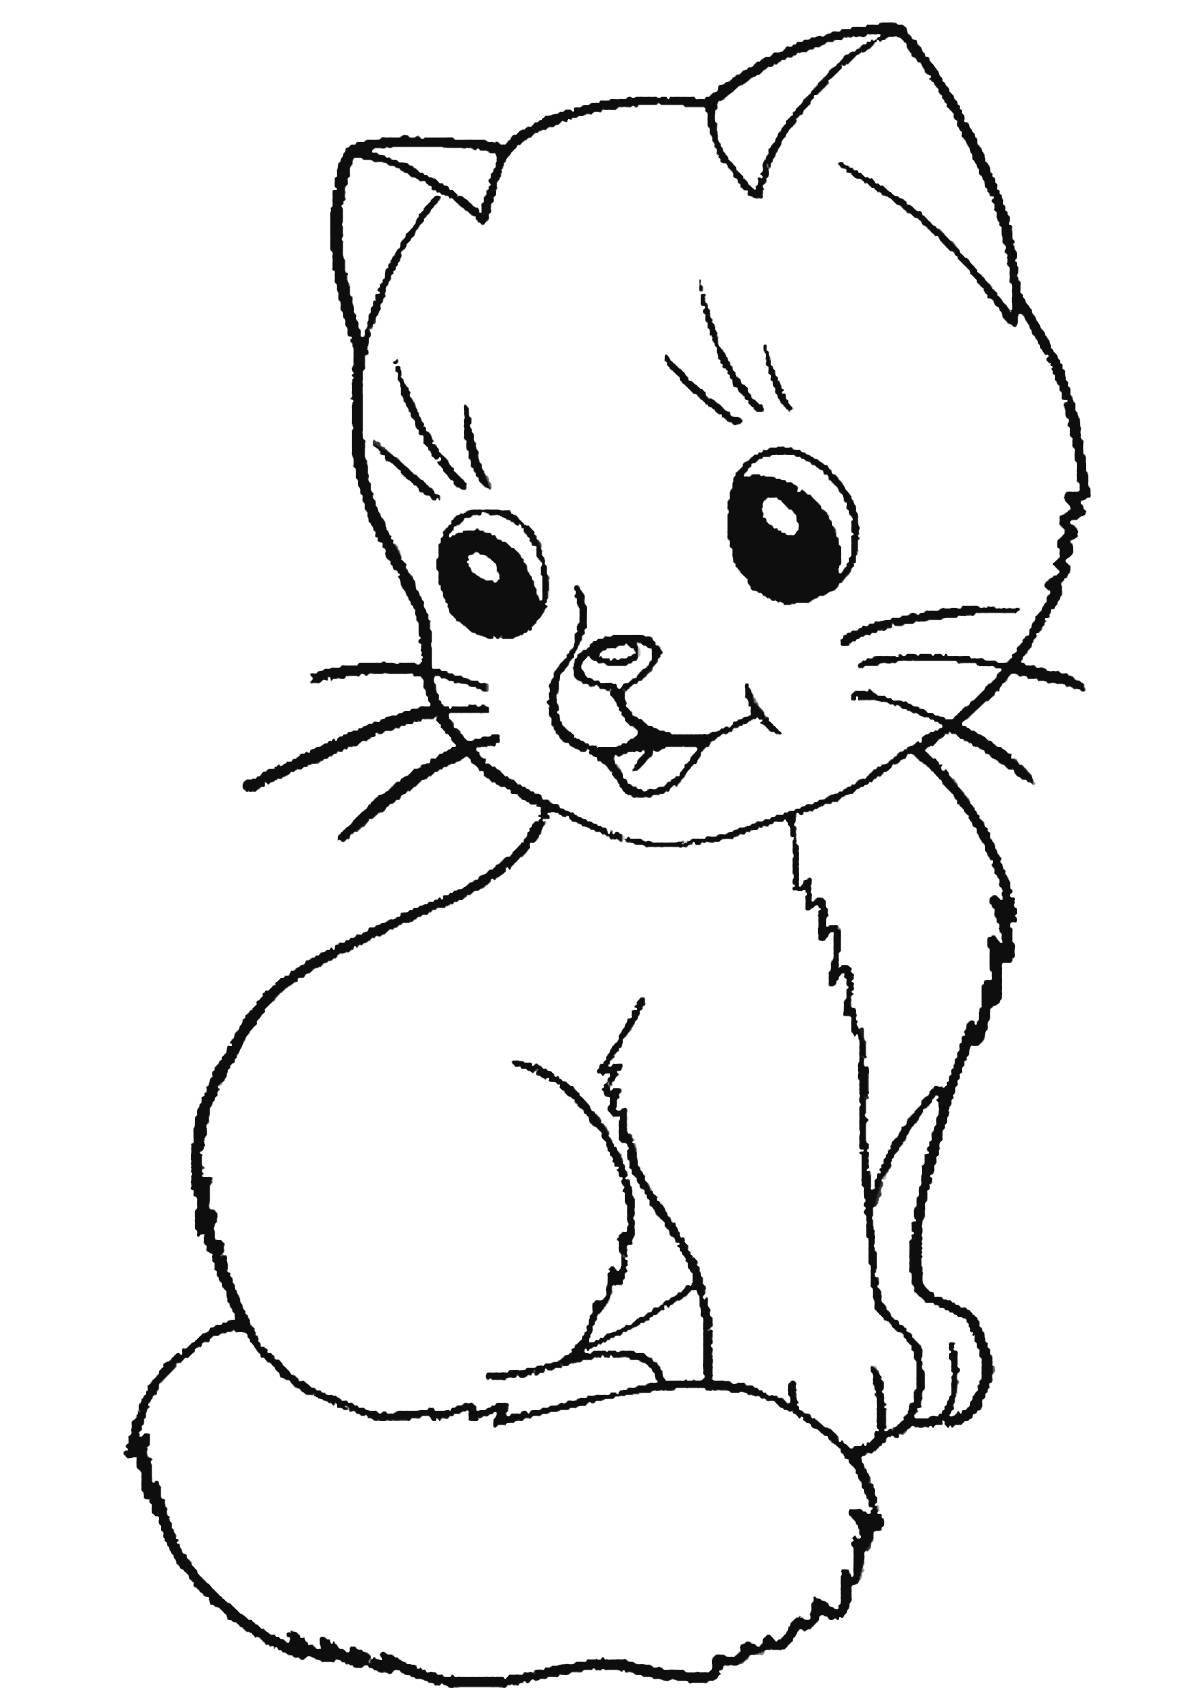 Amazing coloring pages for girls with bright animals